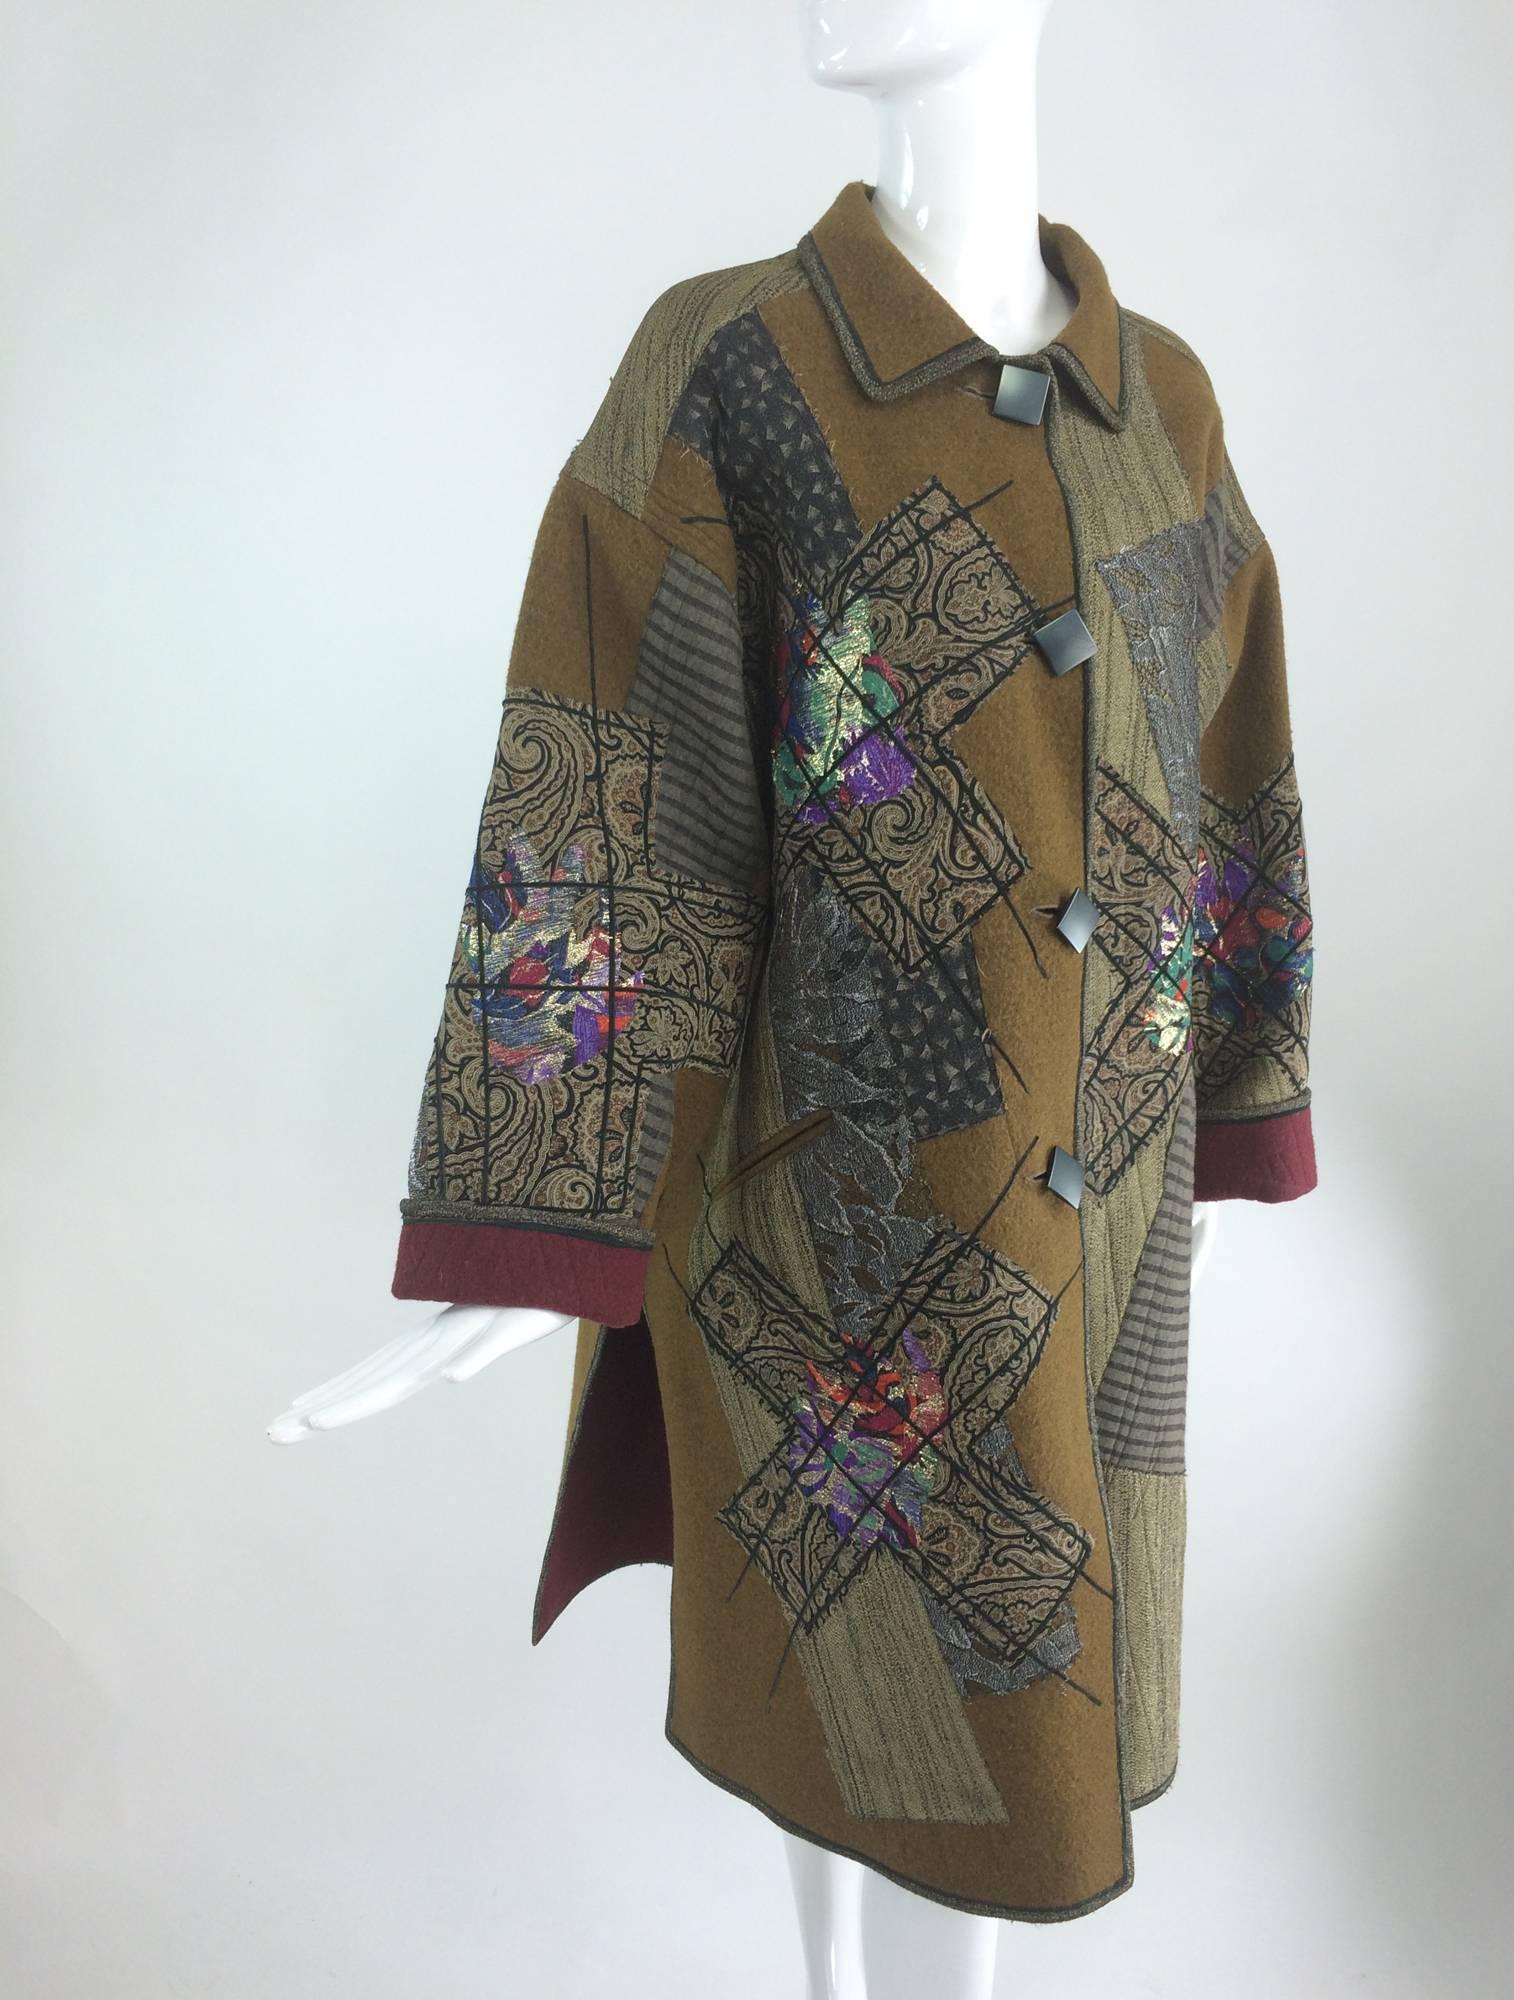 Koos Van Den Akker-Peter DeWilde wool collage big coat 1990s...Art to wear from Koos/DeWilde's 1990s collaboration...Double face wine/tobacco wool coat is quilt appliqued with various metallic fabrics and prints that create a one of a kind work of